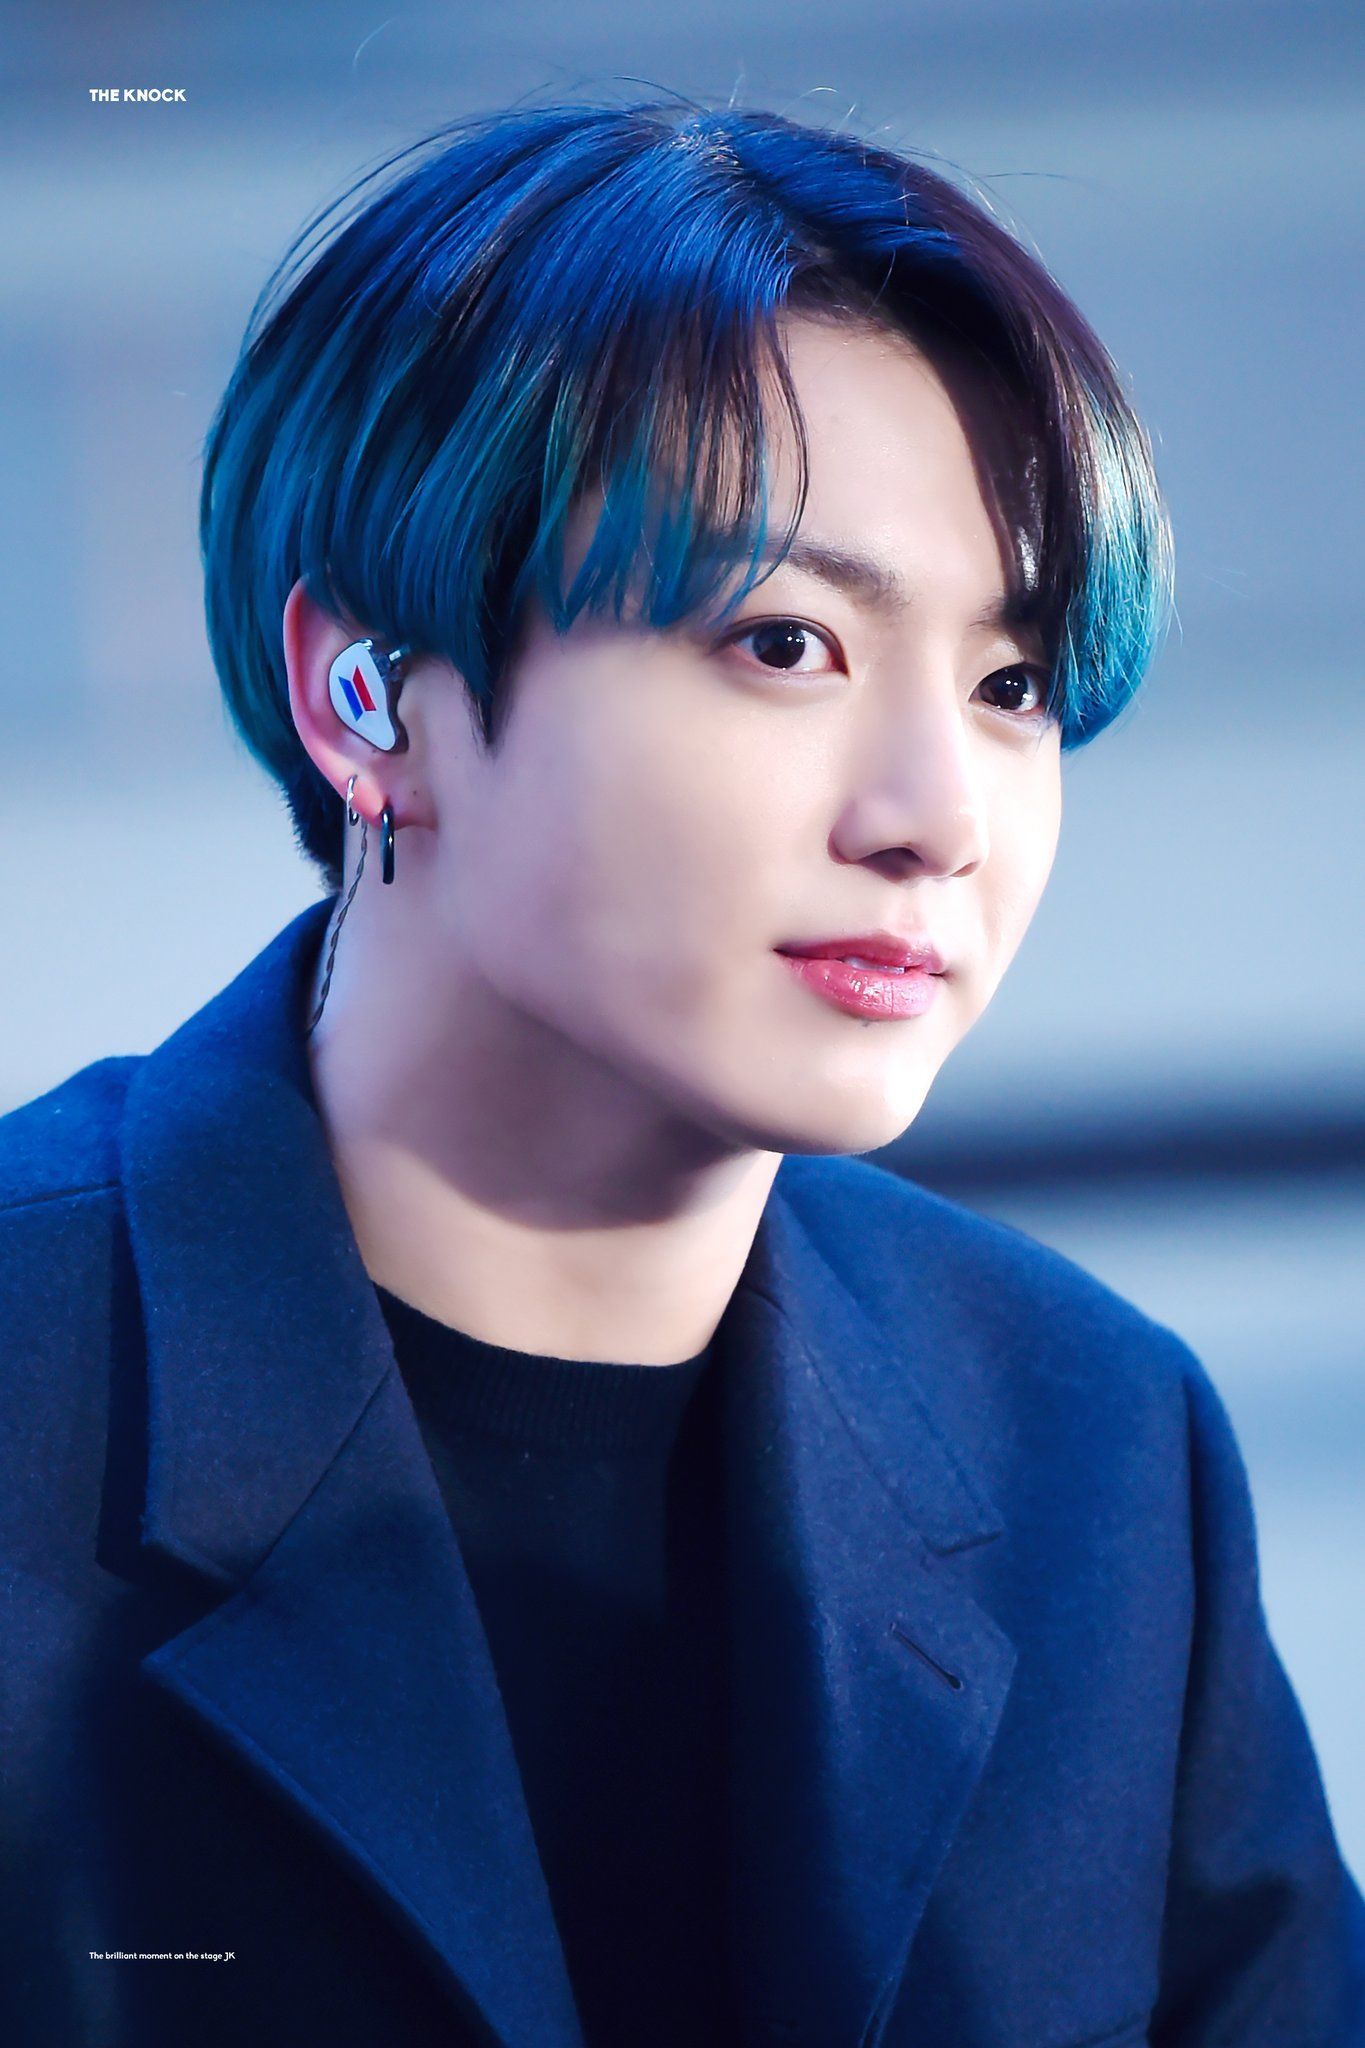 THE KNOCK 더노크 on Twitter. Bts hair colors, Blue hair, Bts jungkook